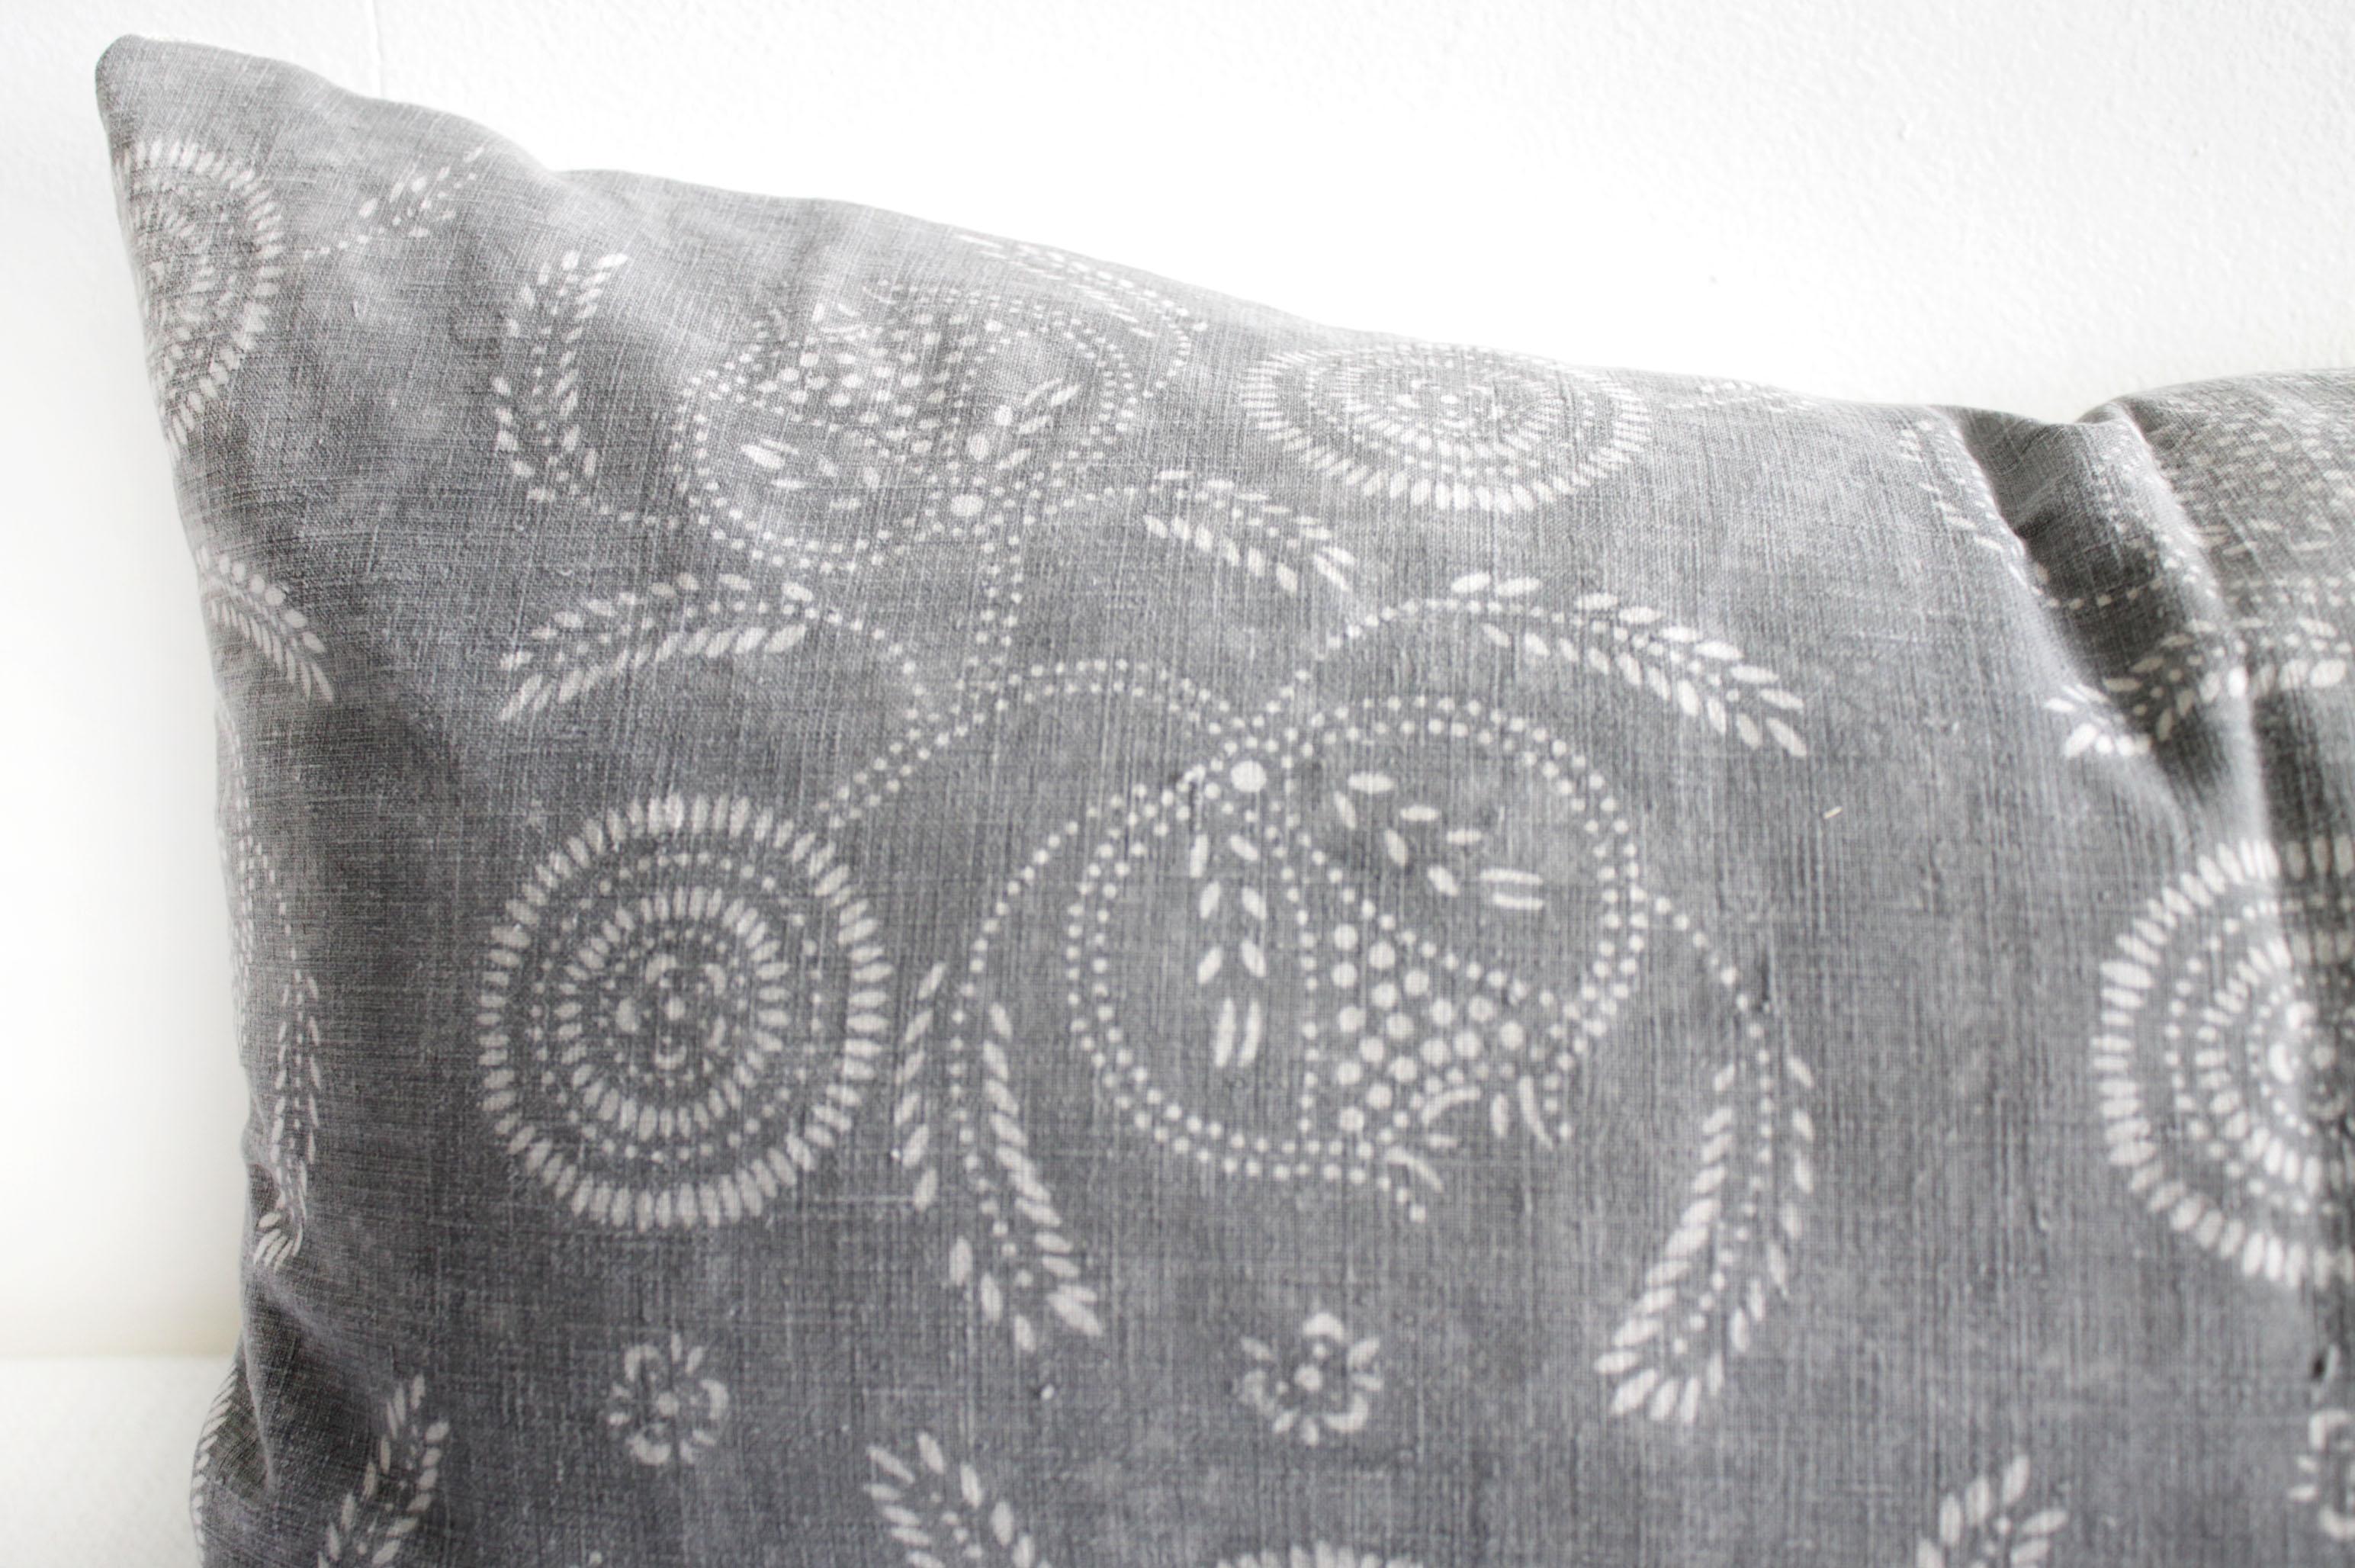 Vintage tribal gray and natural textile pillow
This beautiful pillow features a vintage textile face in a faded gray and soft white pattern. Our pillows are constructed with vintage one of a kind textiles from around the globe. Carefully constructed